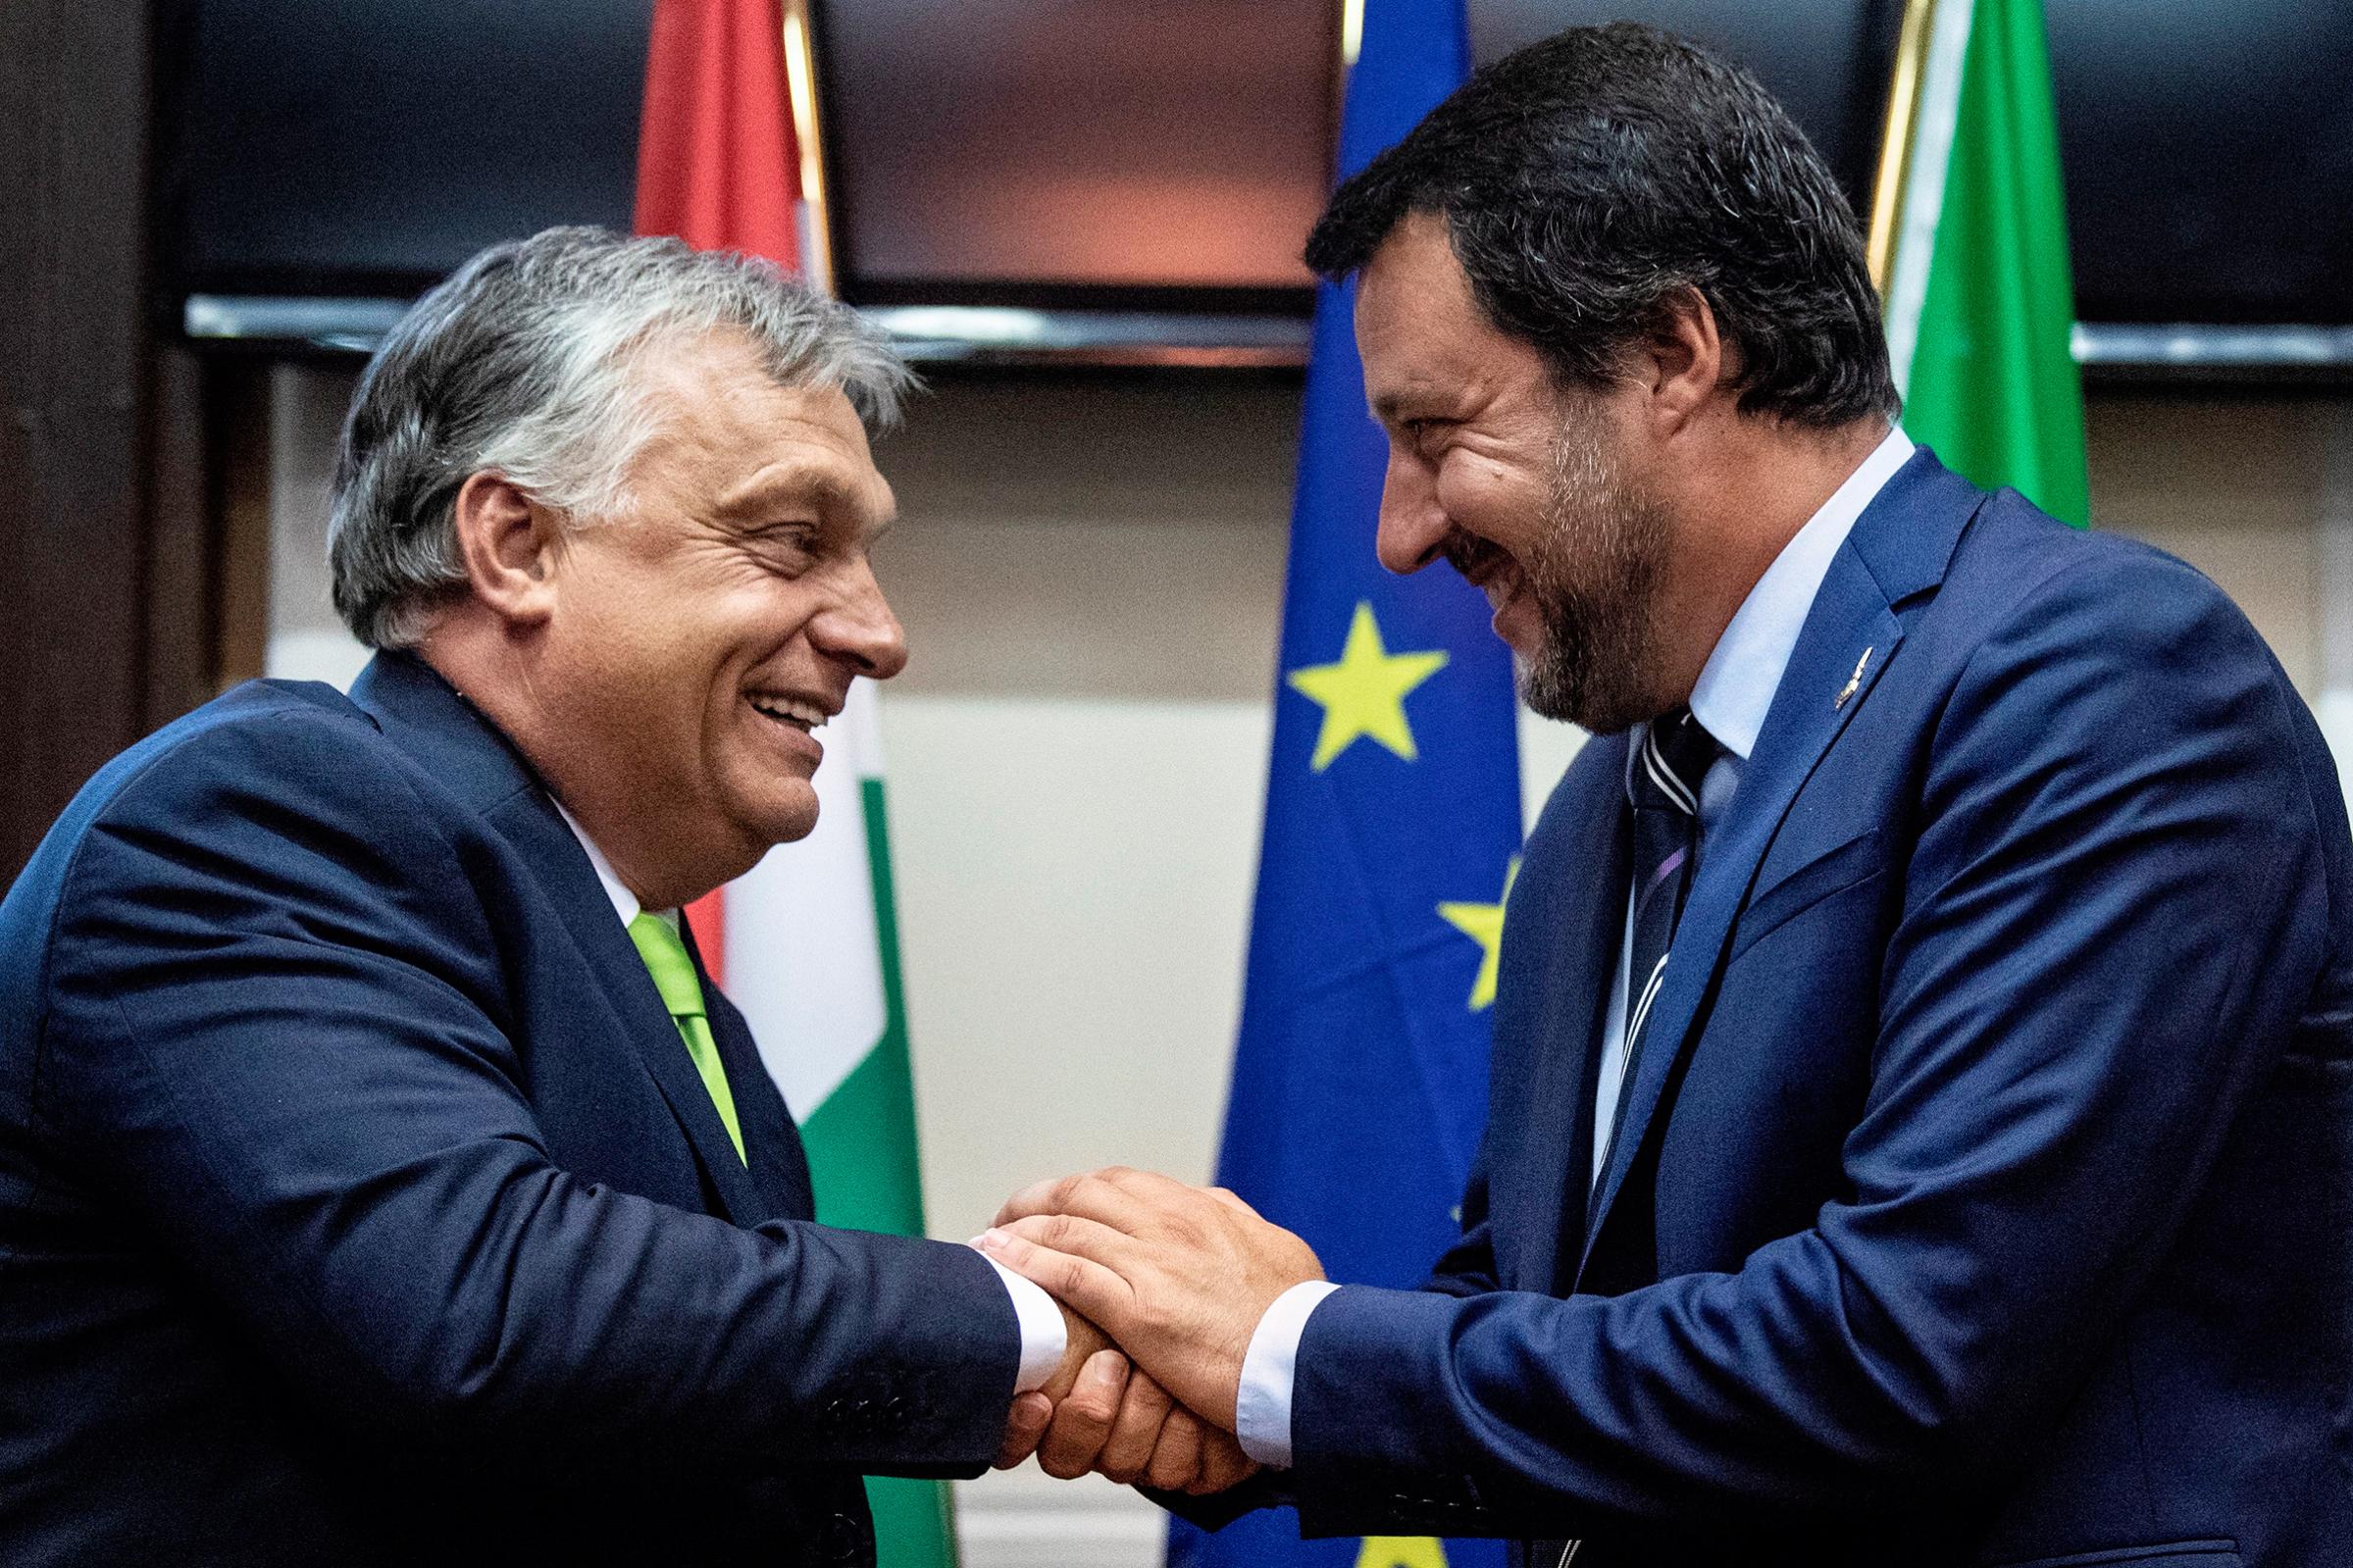 Italy’s Salvini, right, greets Hungary’s Orban in Milan